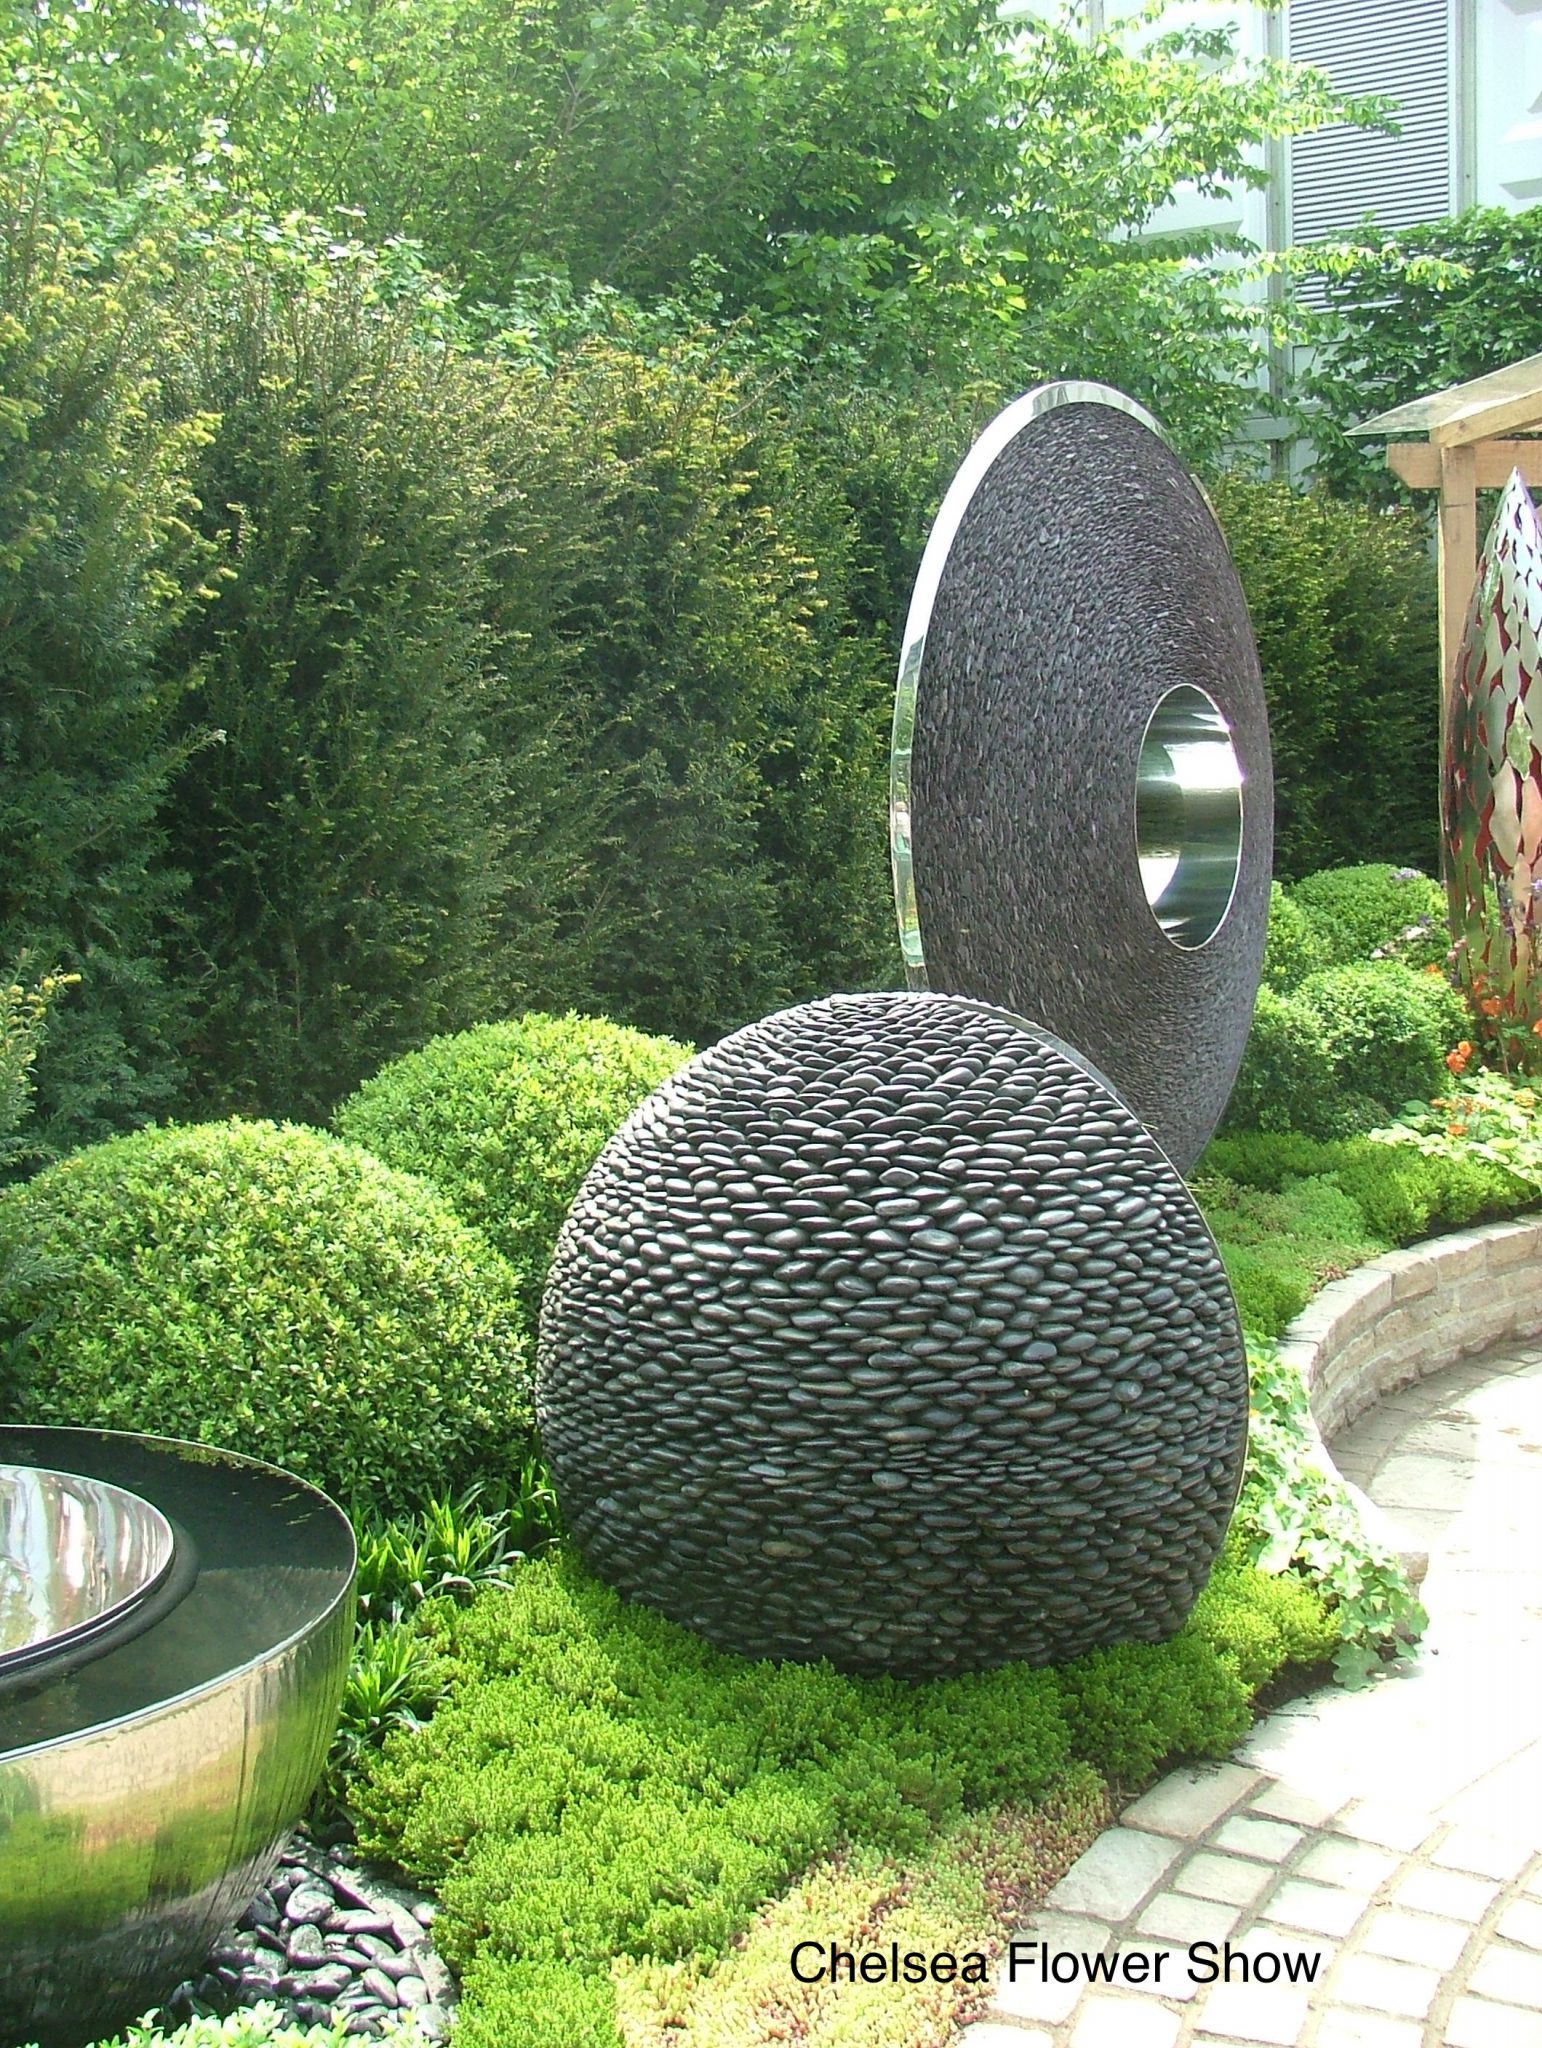 At the Chelsea Flower Show. Photo by Anne Guy.